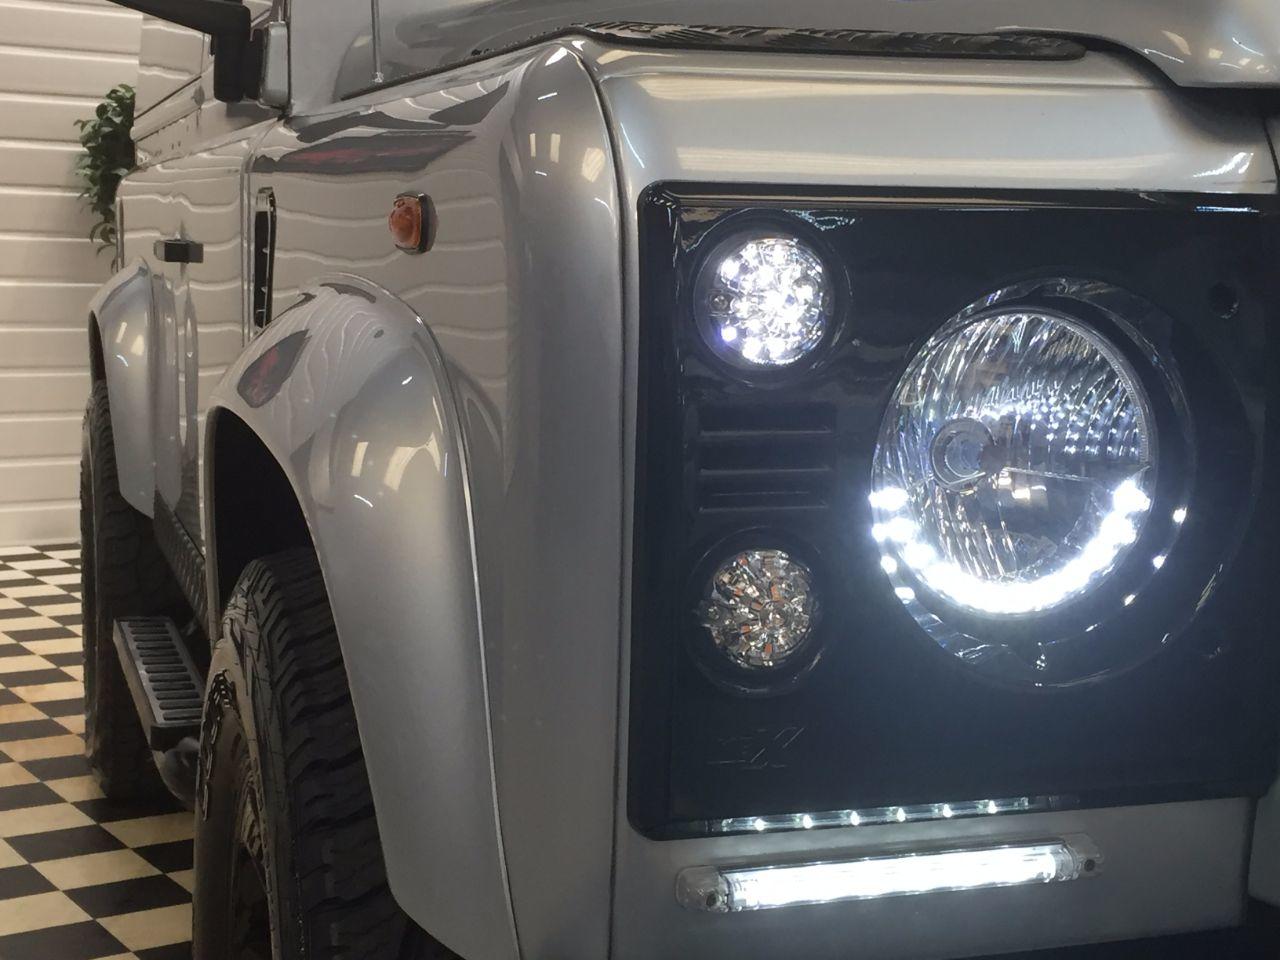 Land Rover Defender 2.2 SOLD GOING TO WATFORD Four Wheel Drive Diesel Indus Silver